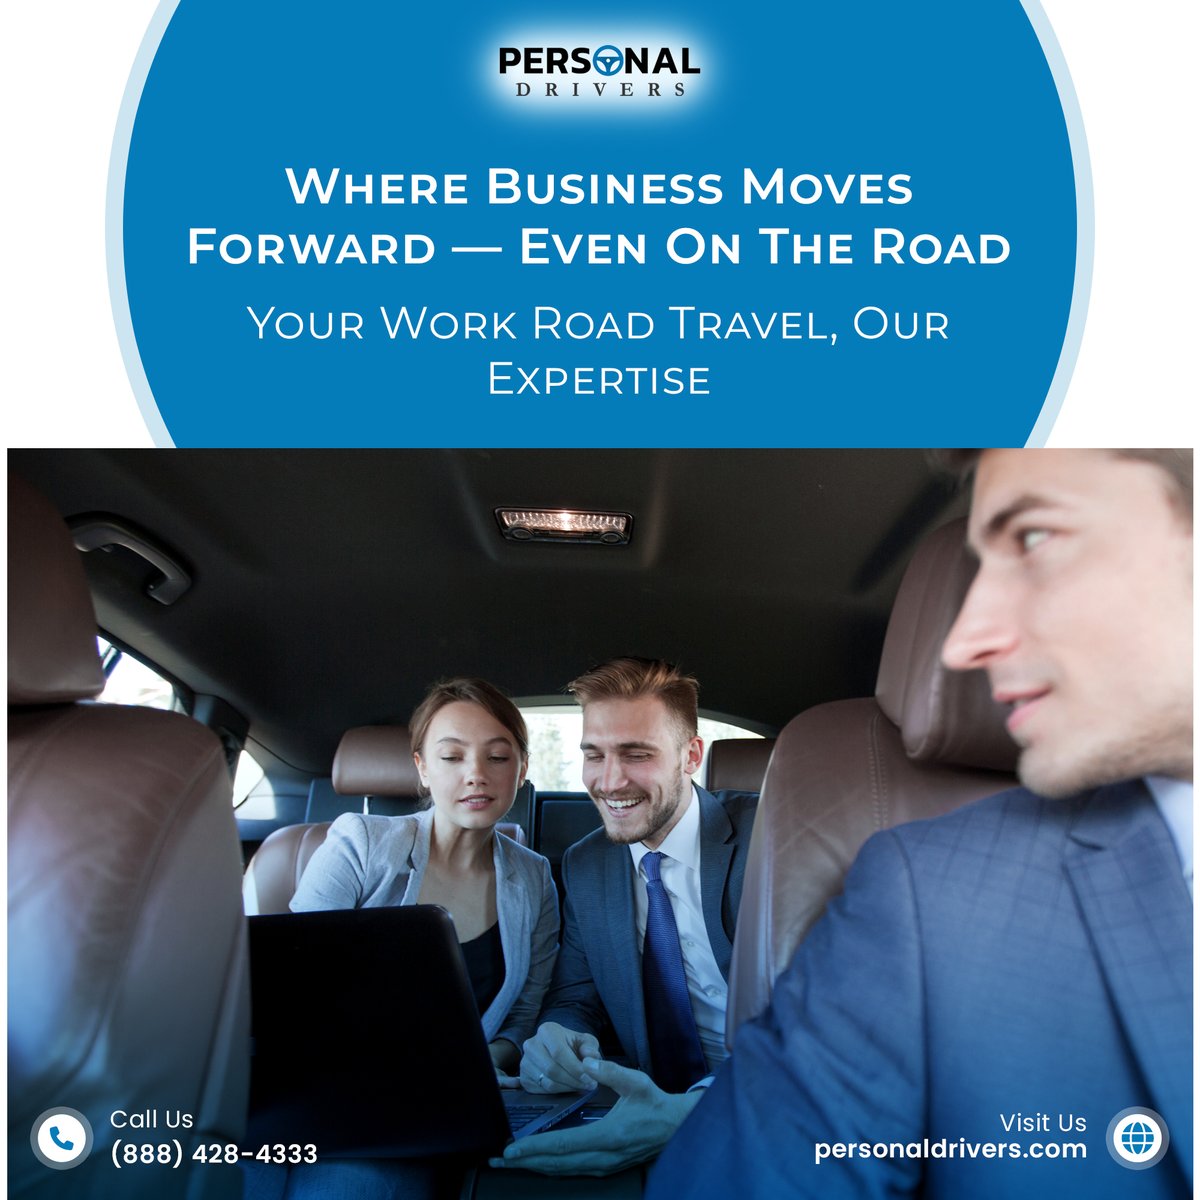 Turn travel time into productive time with our personal driver service. Keep the business momentum going!🚗💡
#BusinessTravel #LongDistanceDriver #Personaldrivers #Personaldriver